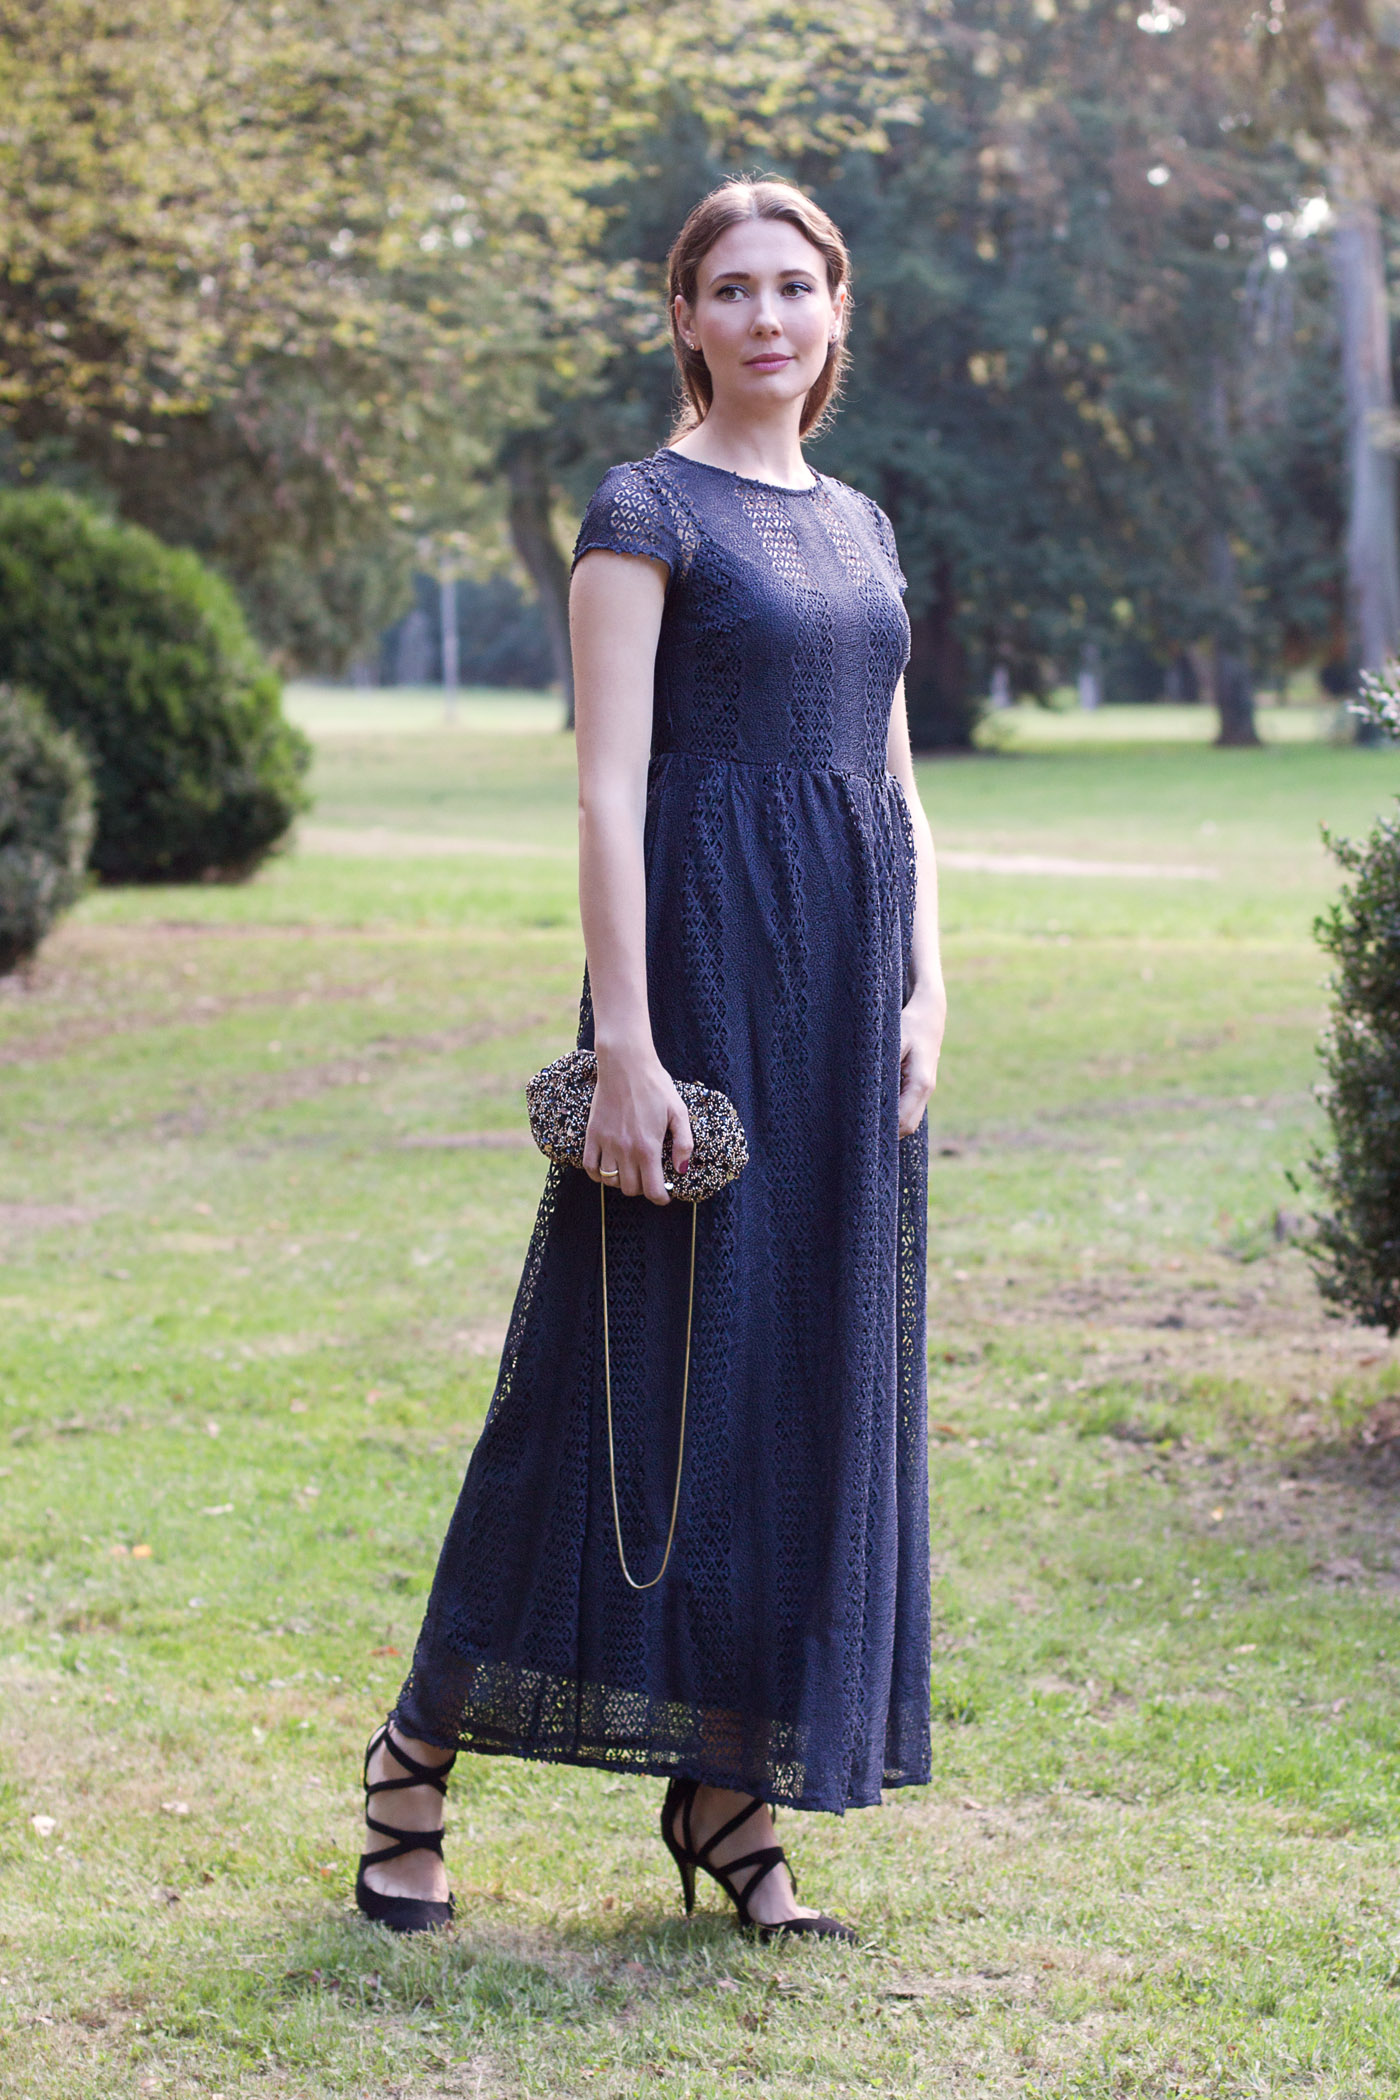 zaraoutfit_maxi_dress_lace_fashionblog_autumnlook_chic_sophisticated_4